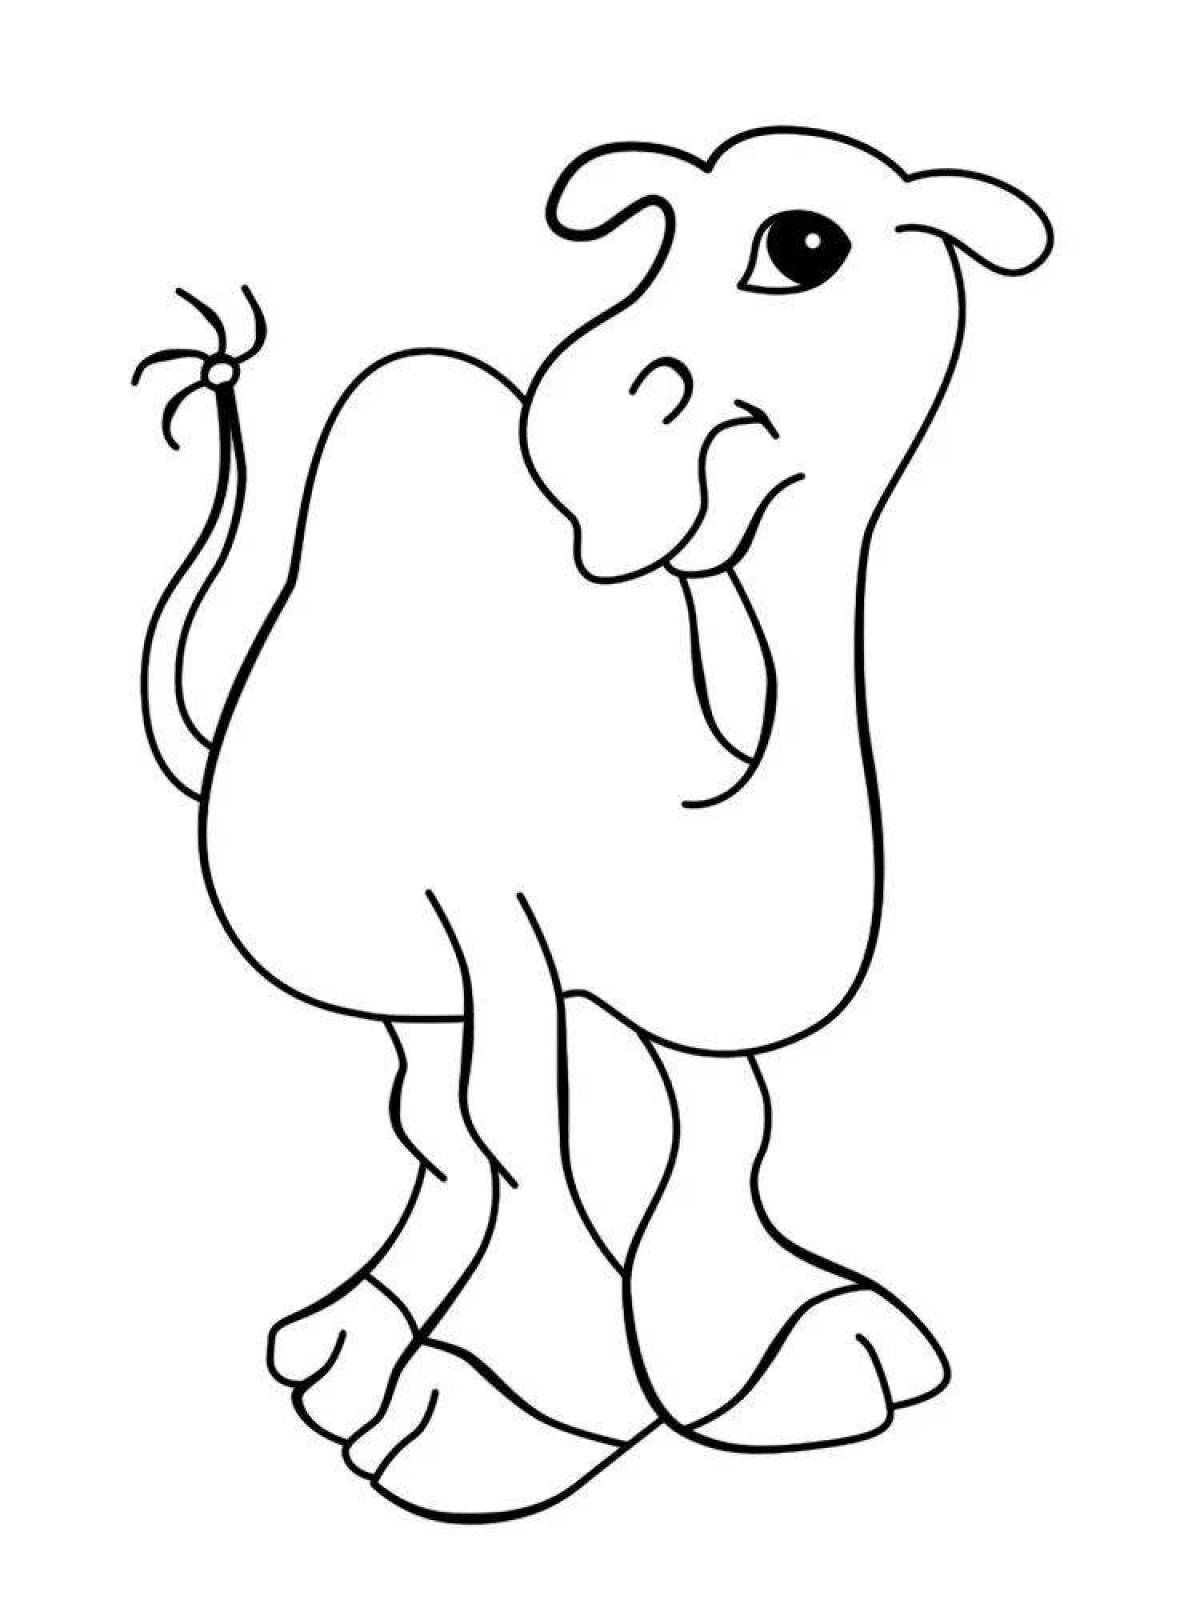 Coloring page graceful rhinoceros